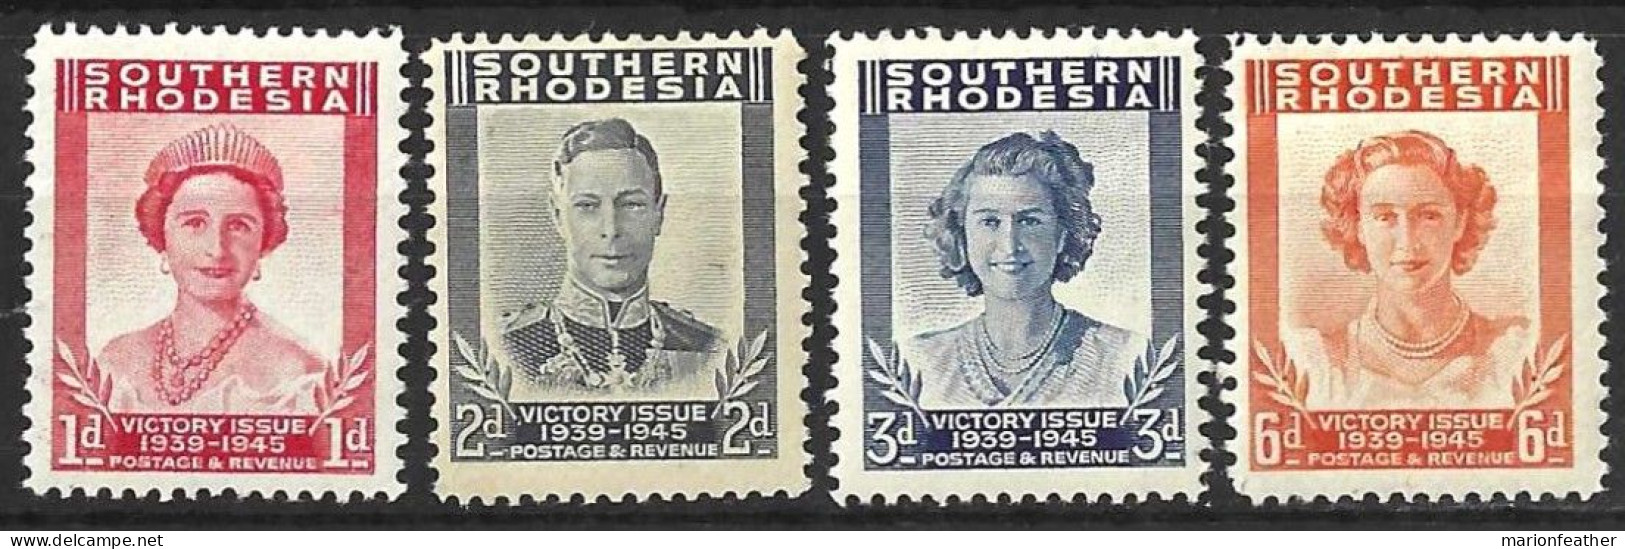 SOUTHERN RHODESIA...KING GEORGE VI..(1936-52.)...." 1924.."....VICTORY , SET OF 4.....MH..... - Southern Rhodesia (...-1964)